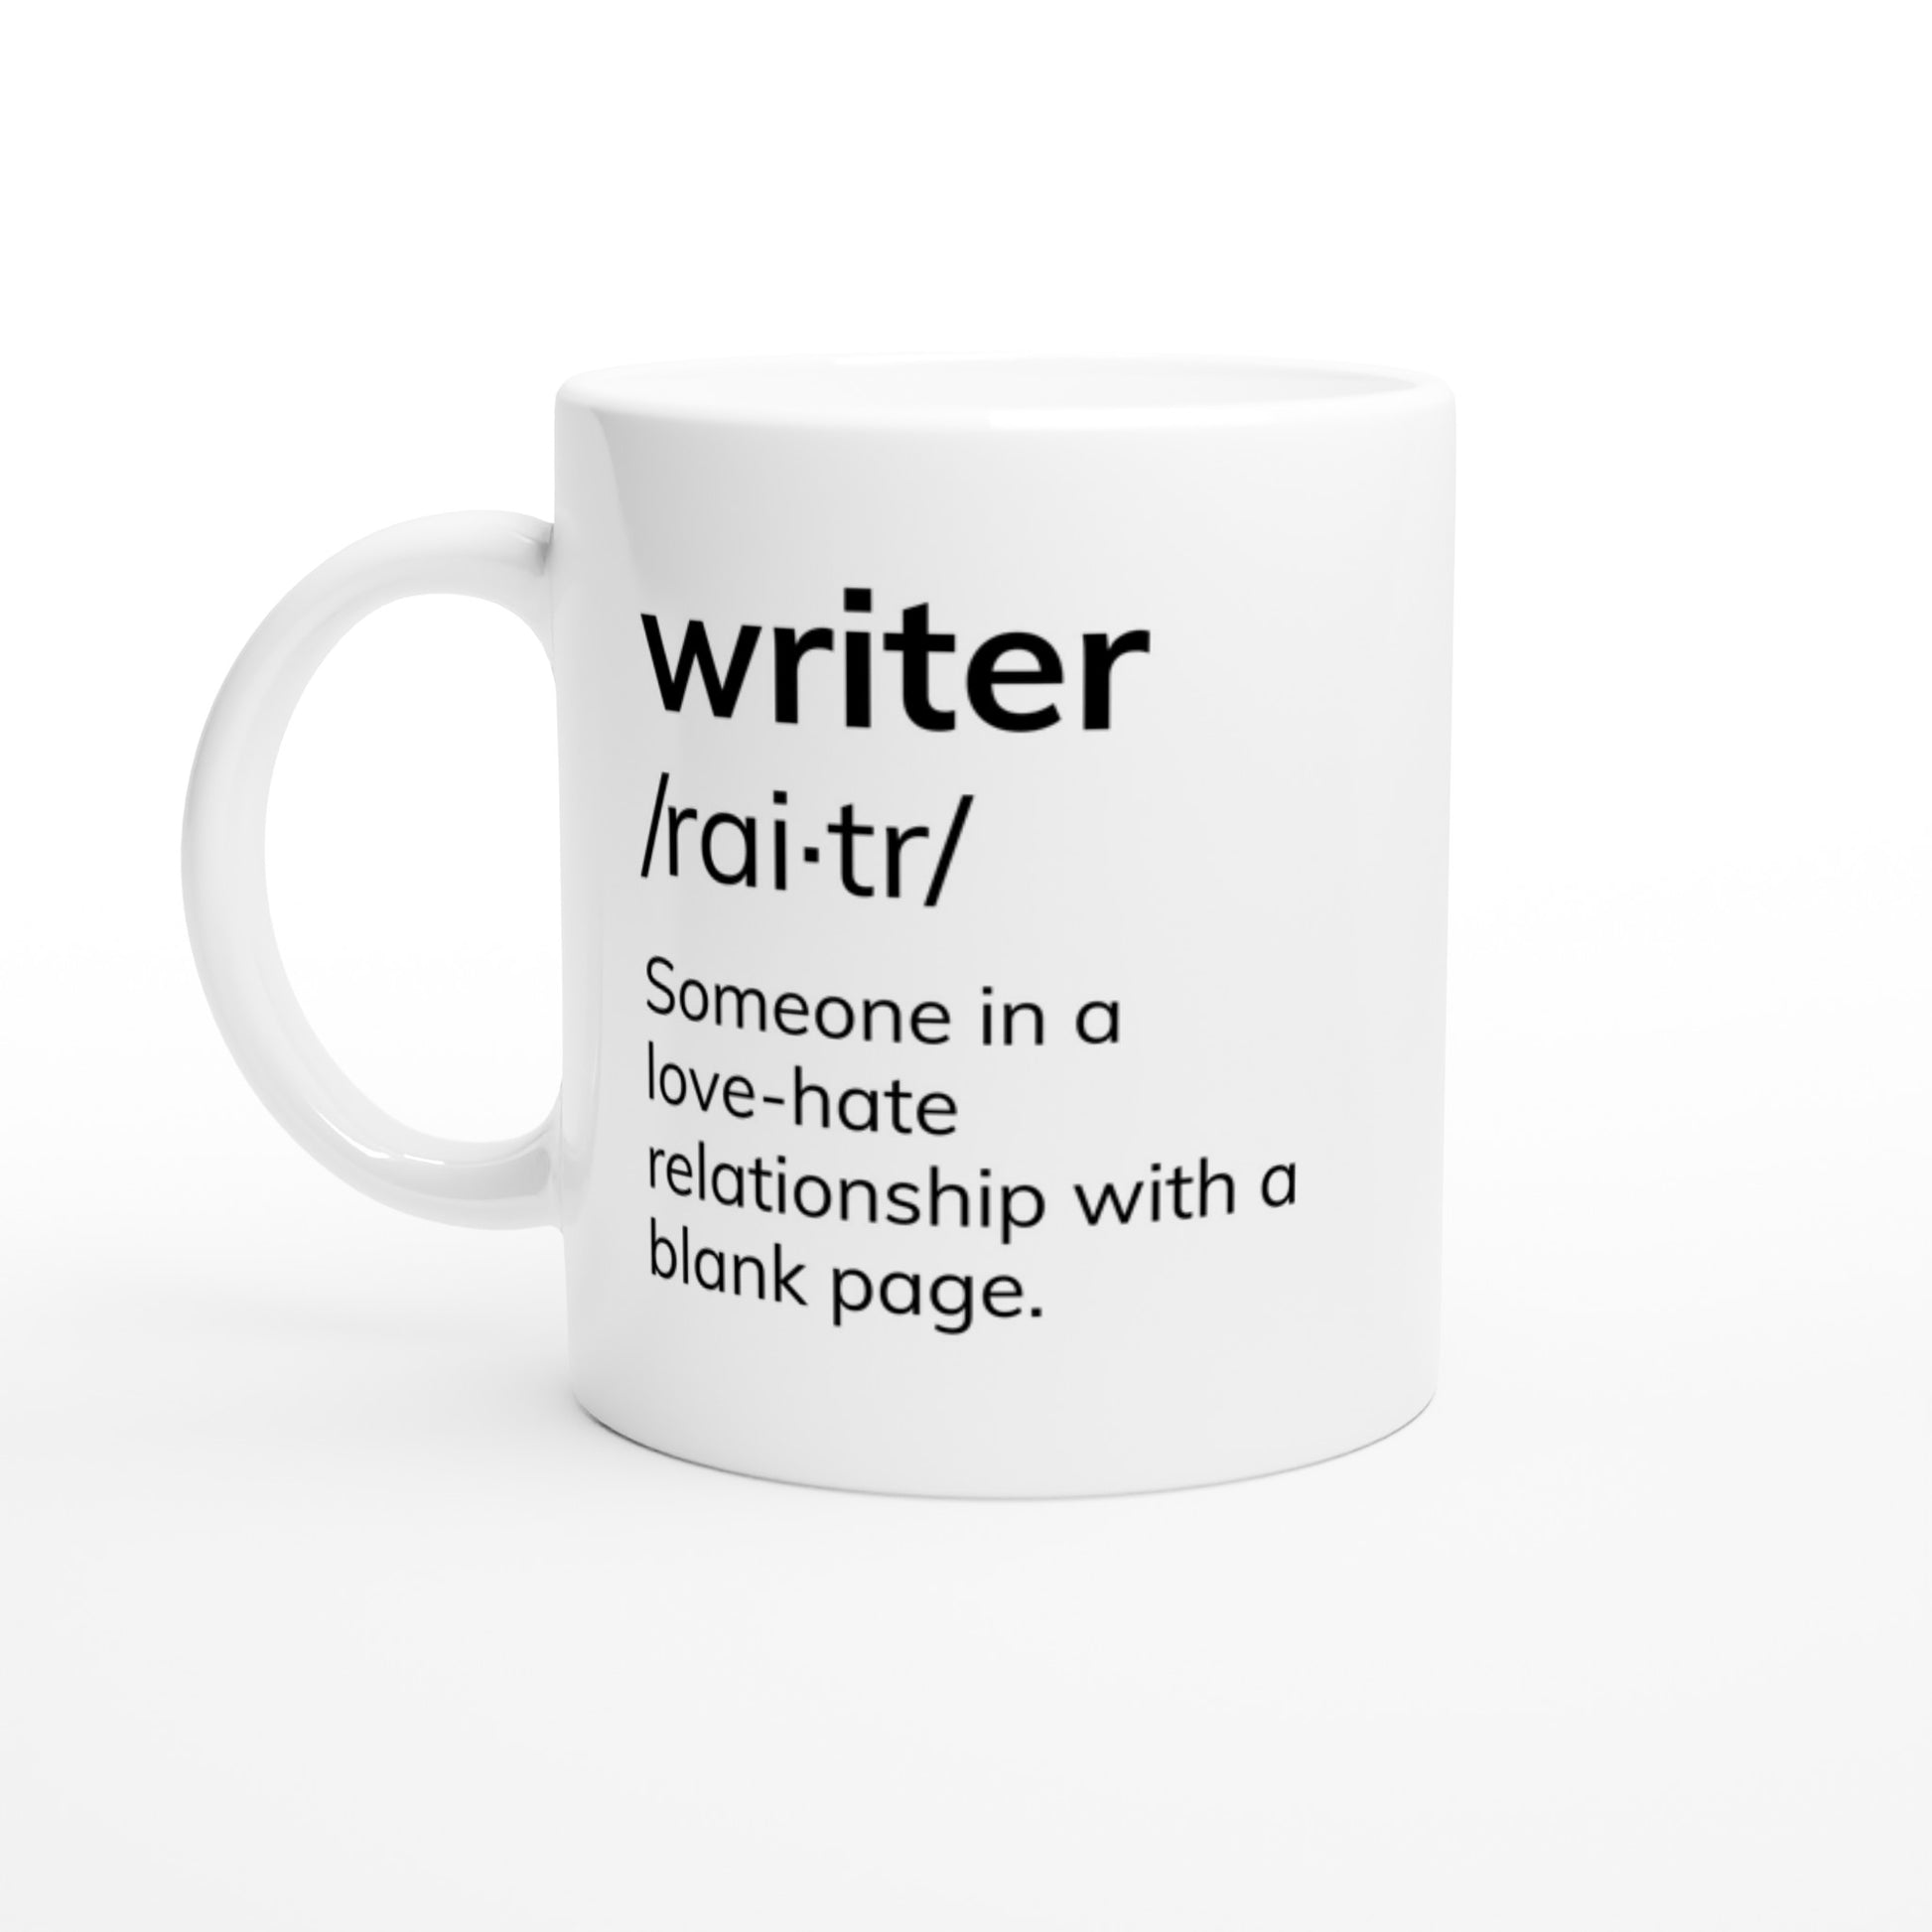 A white coffee mug with the product name "Writer: Someone in a love-hate relationship with a blank page // Writing Themed Mug" on it.